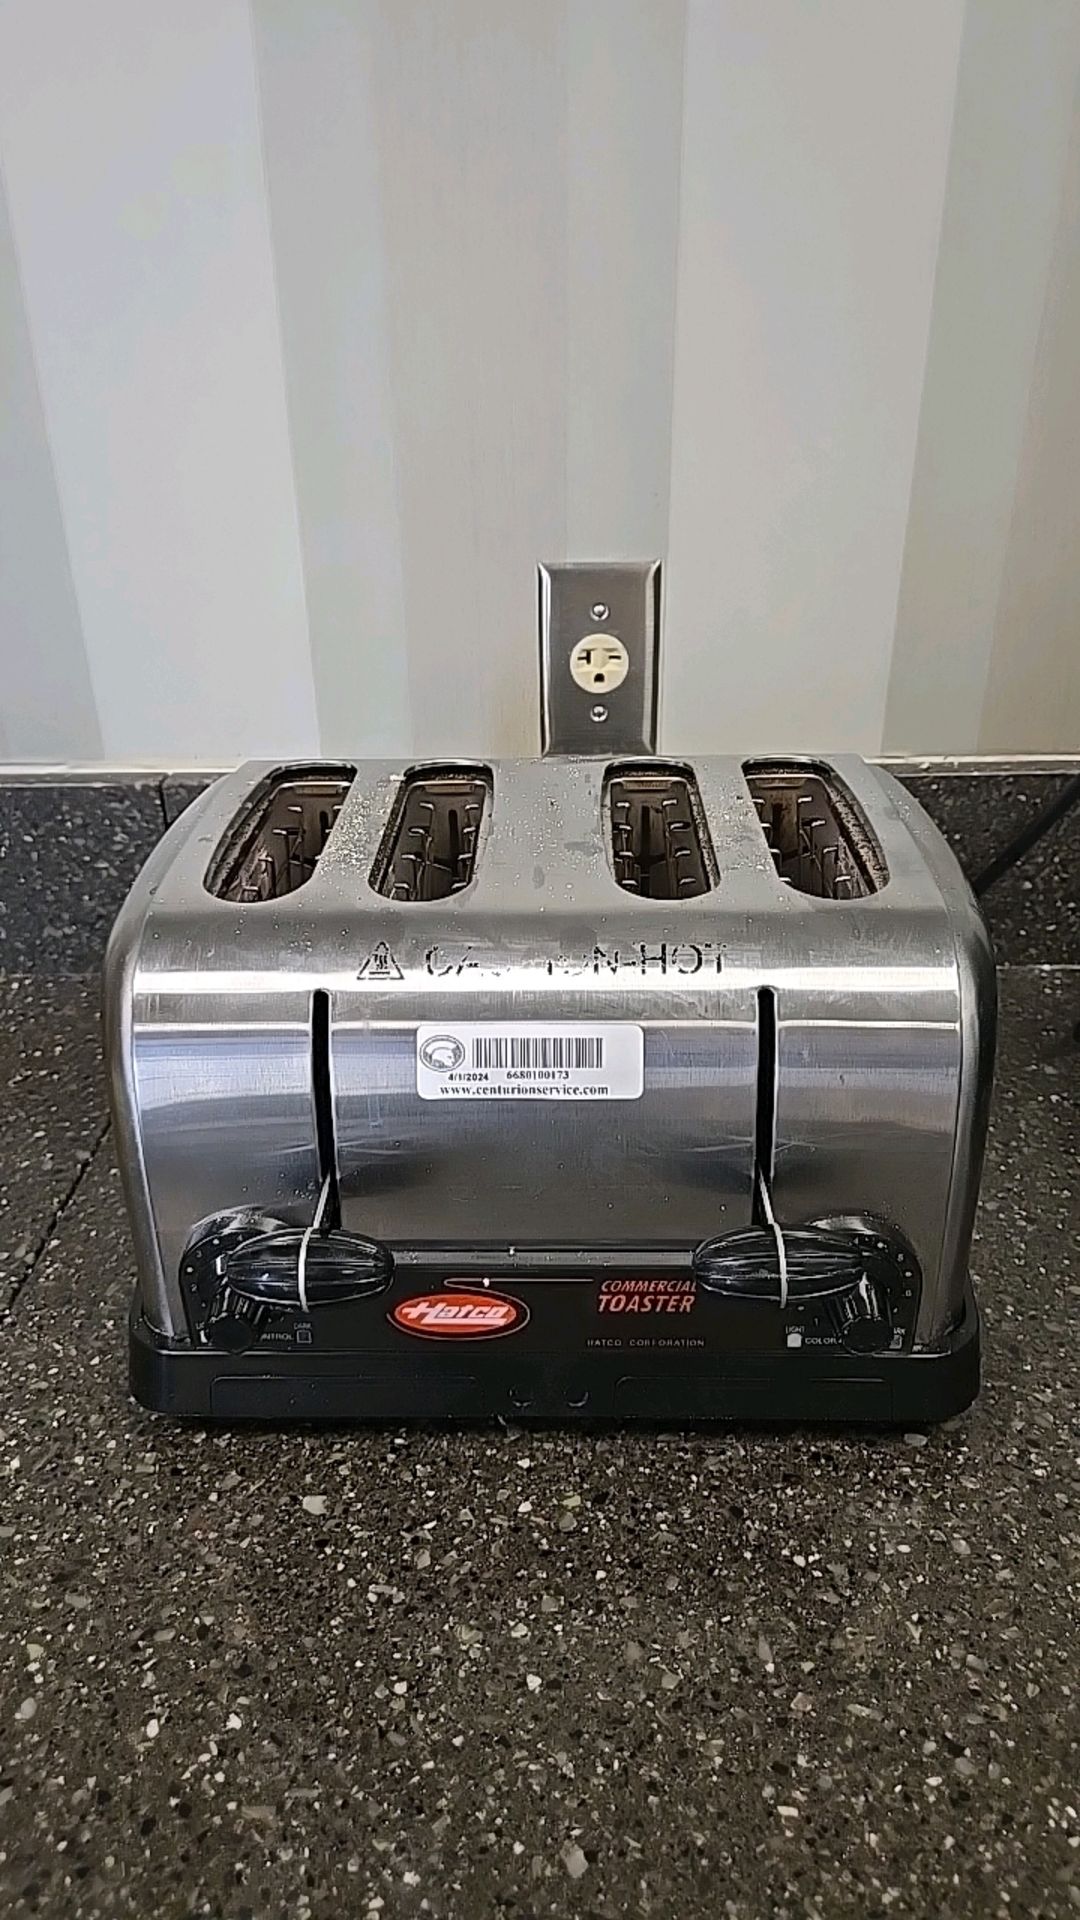 HATCO TP-120 FOUR-SLOT COUNTERTOP COMMERCIAL TOASTER